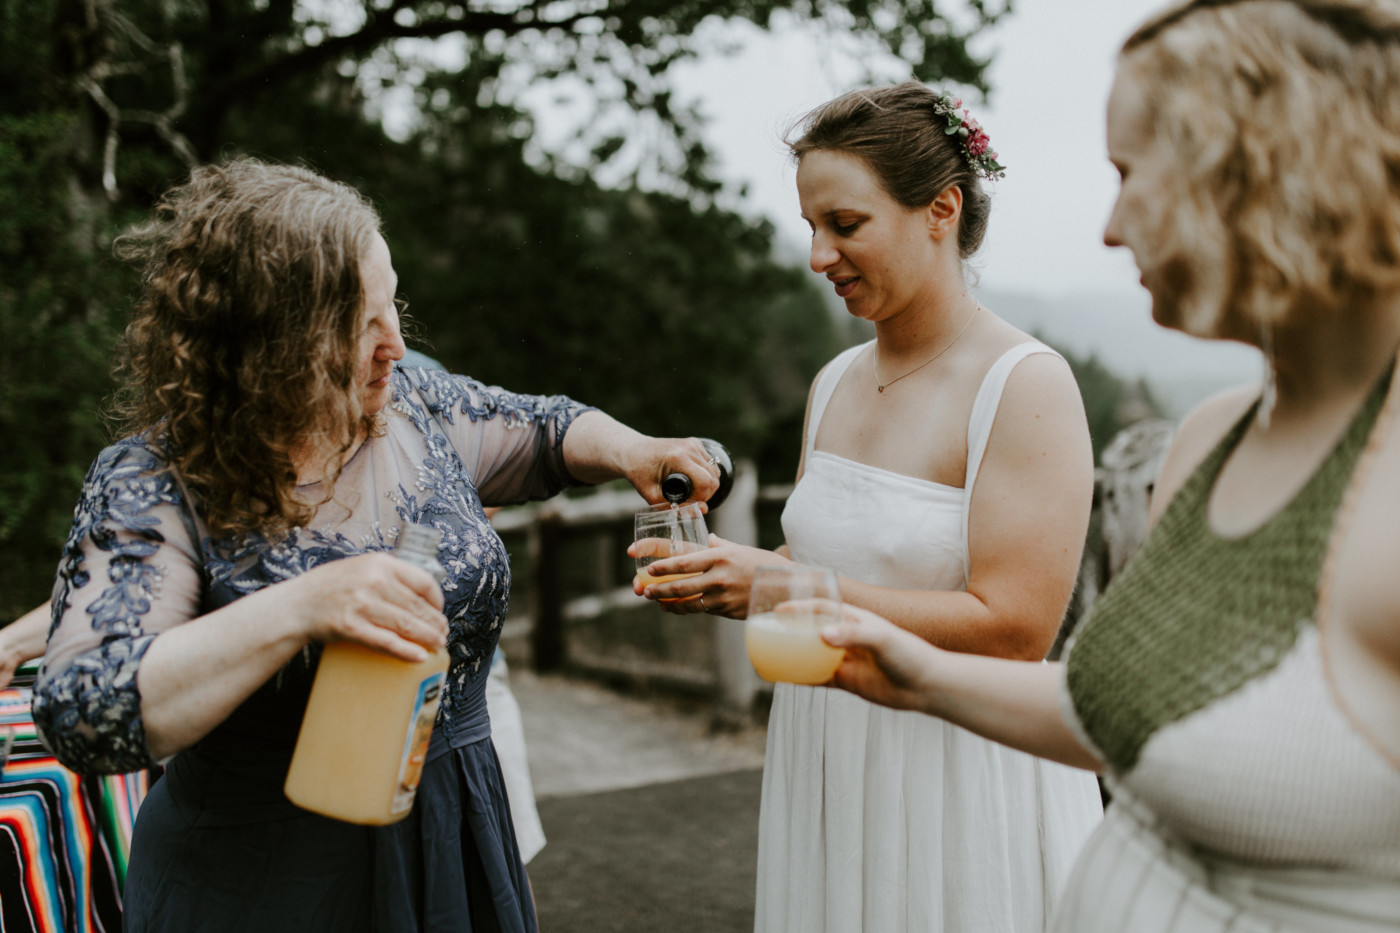 Kate and Audrey have drinks poured for them. Elopement wedding photography at Bridal Veil Falls by Sienna Plus Josh.